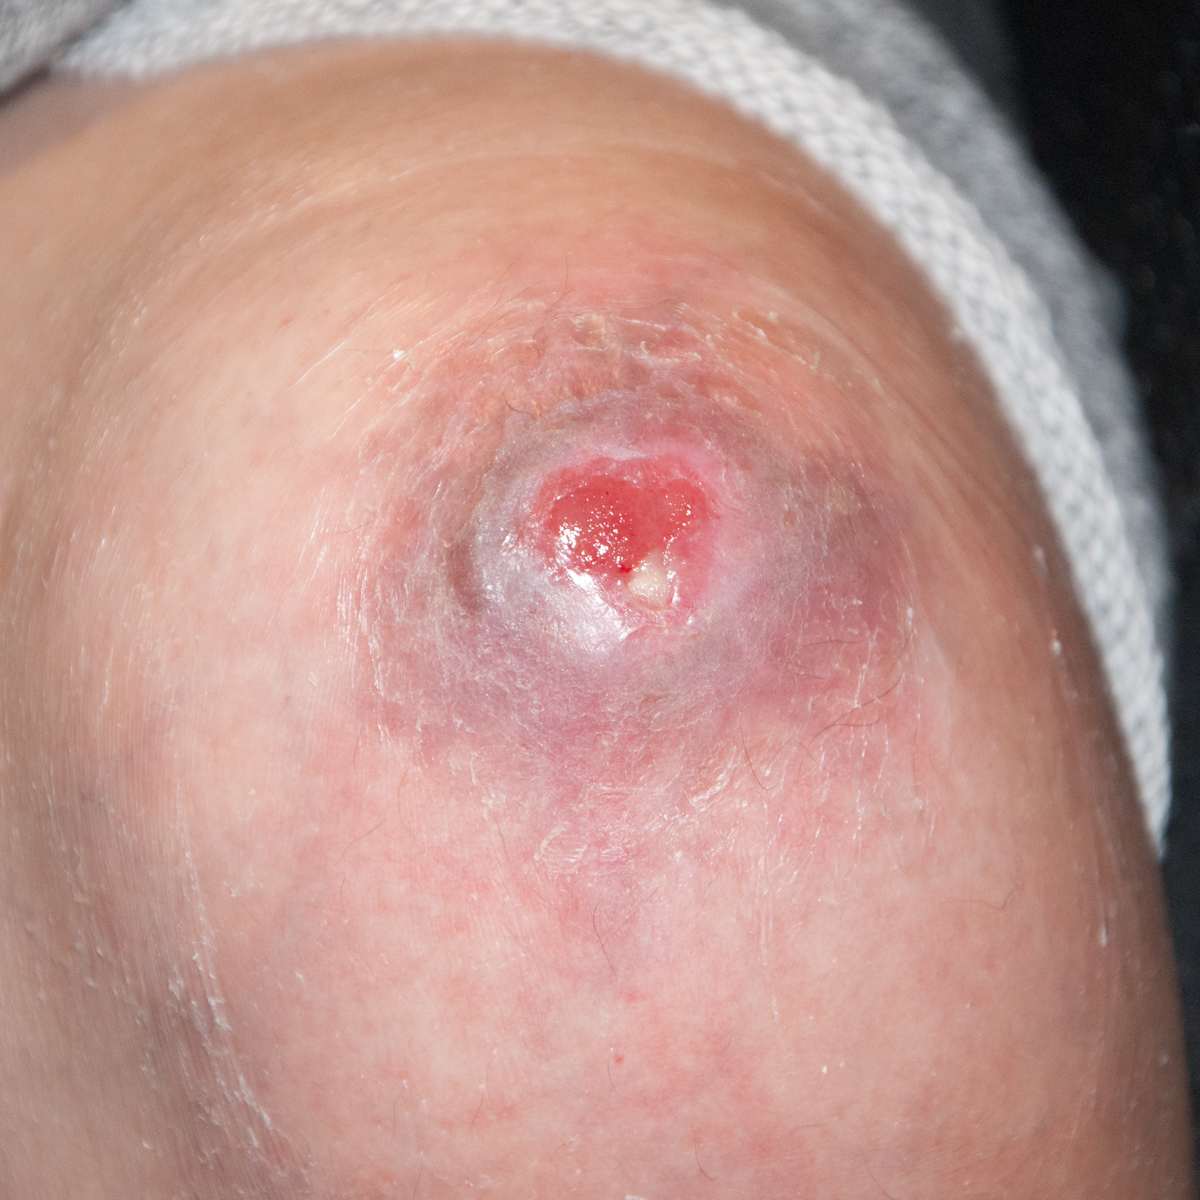 Infected wound on knee